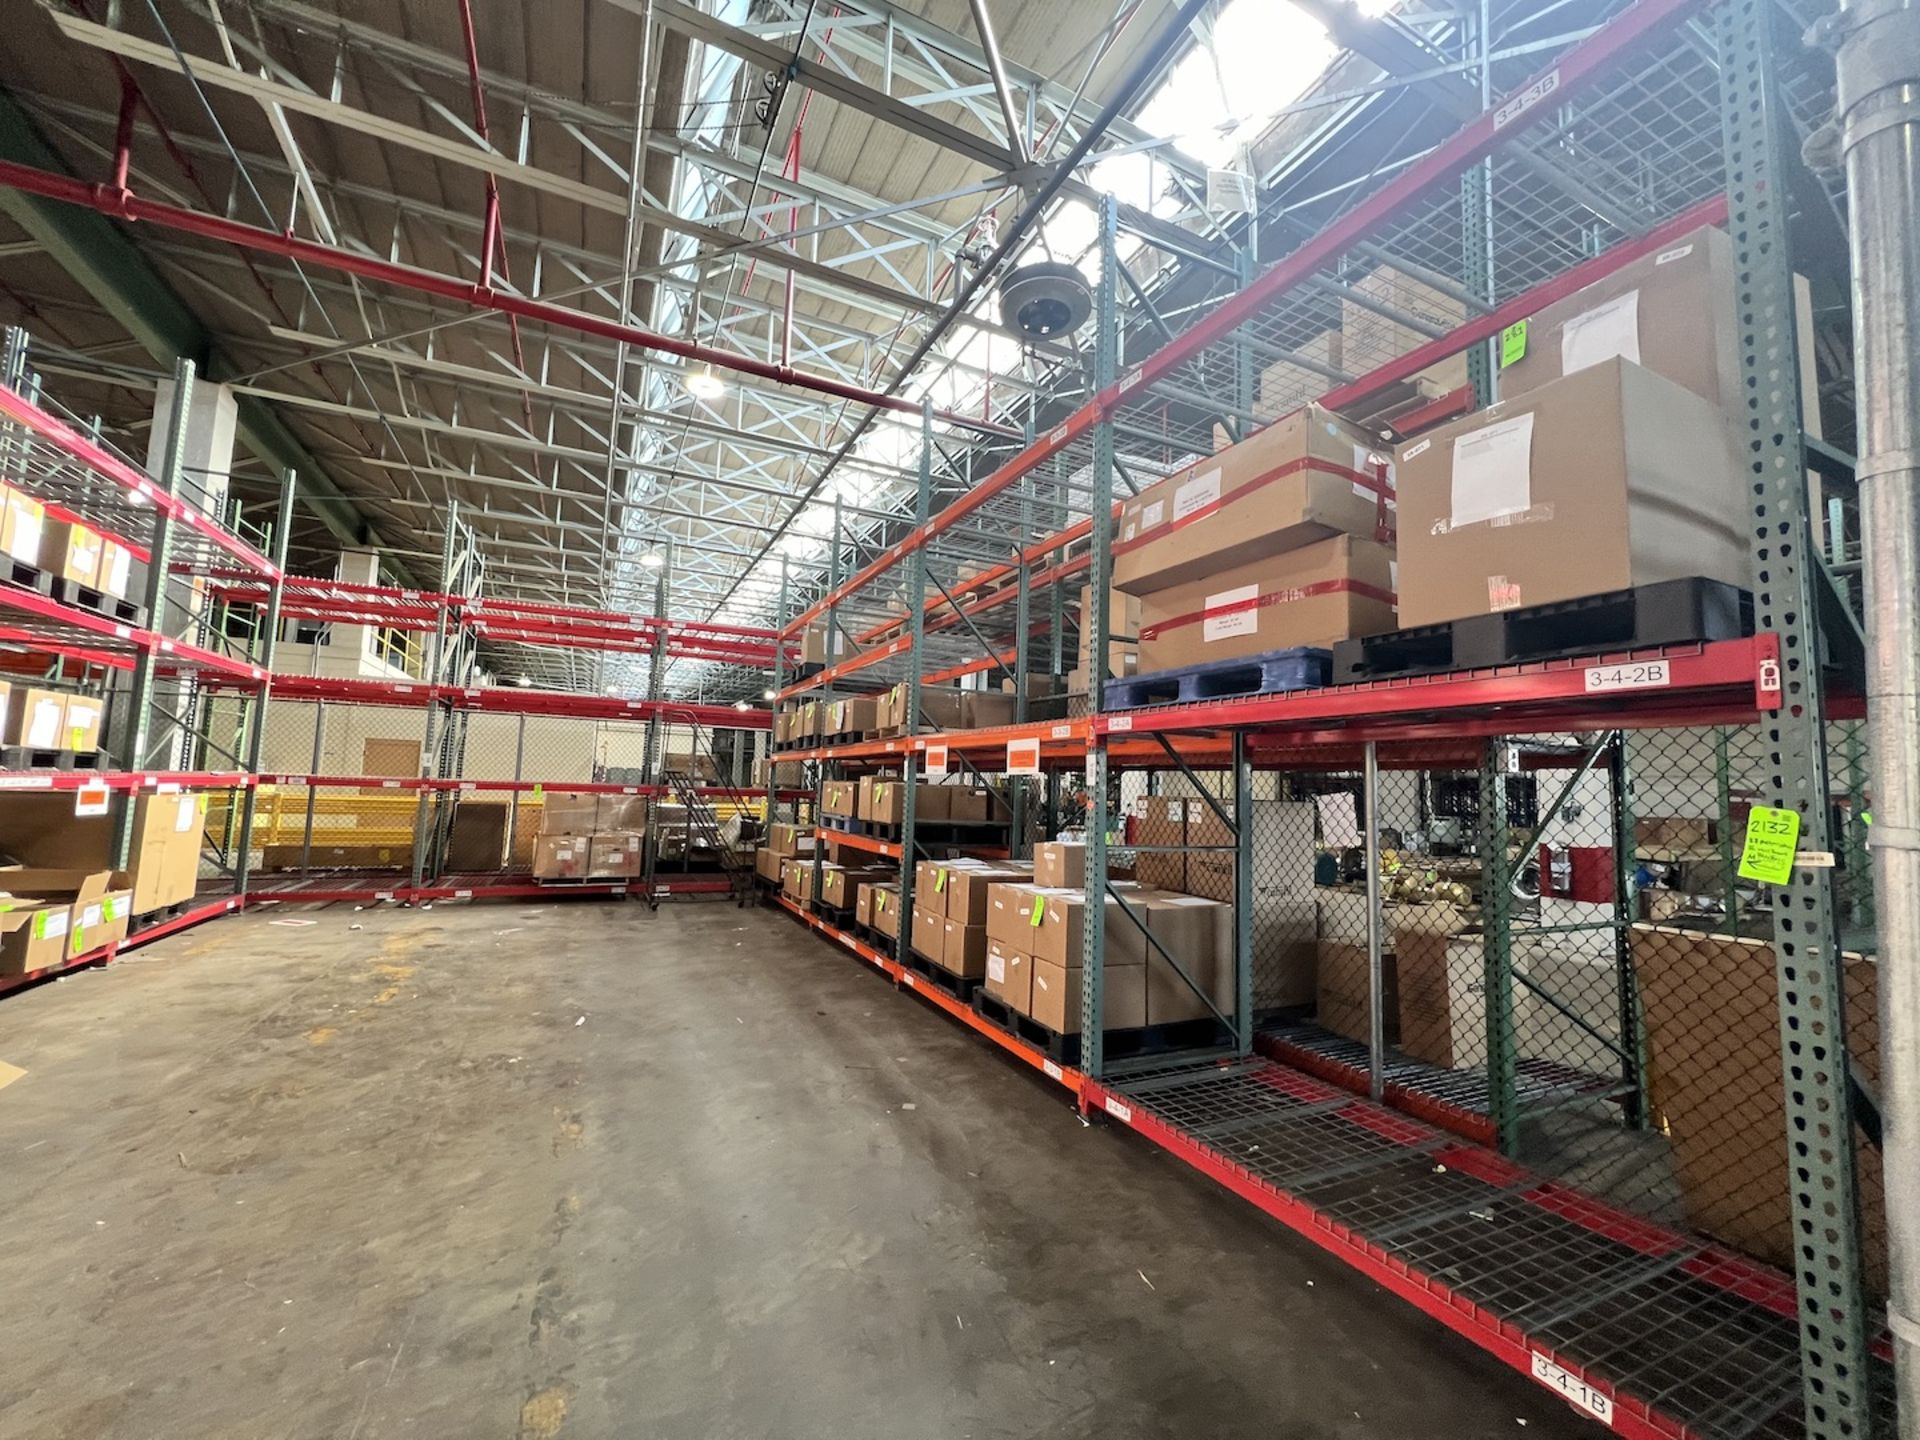 PALLET RACKING, INCLUDES APPROX. 88 PALLET SPACES, 86 CROSS BEAMS AND 14 UP RIGHTS